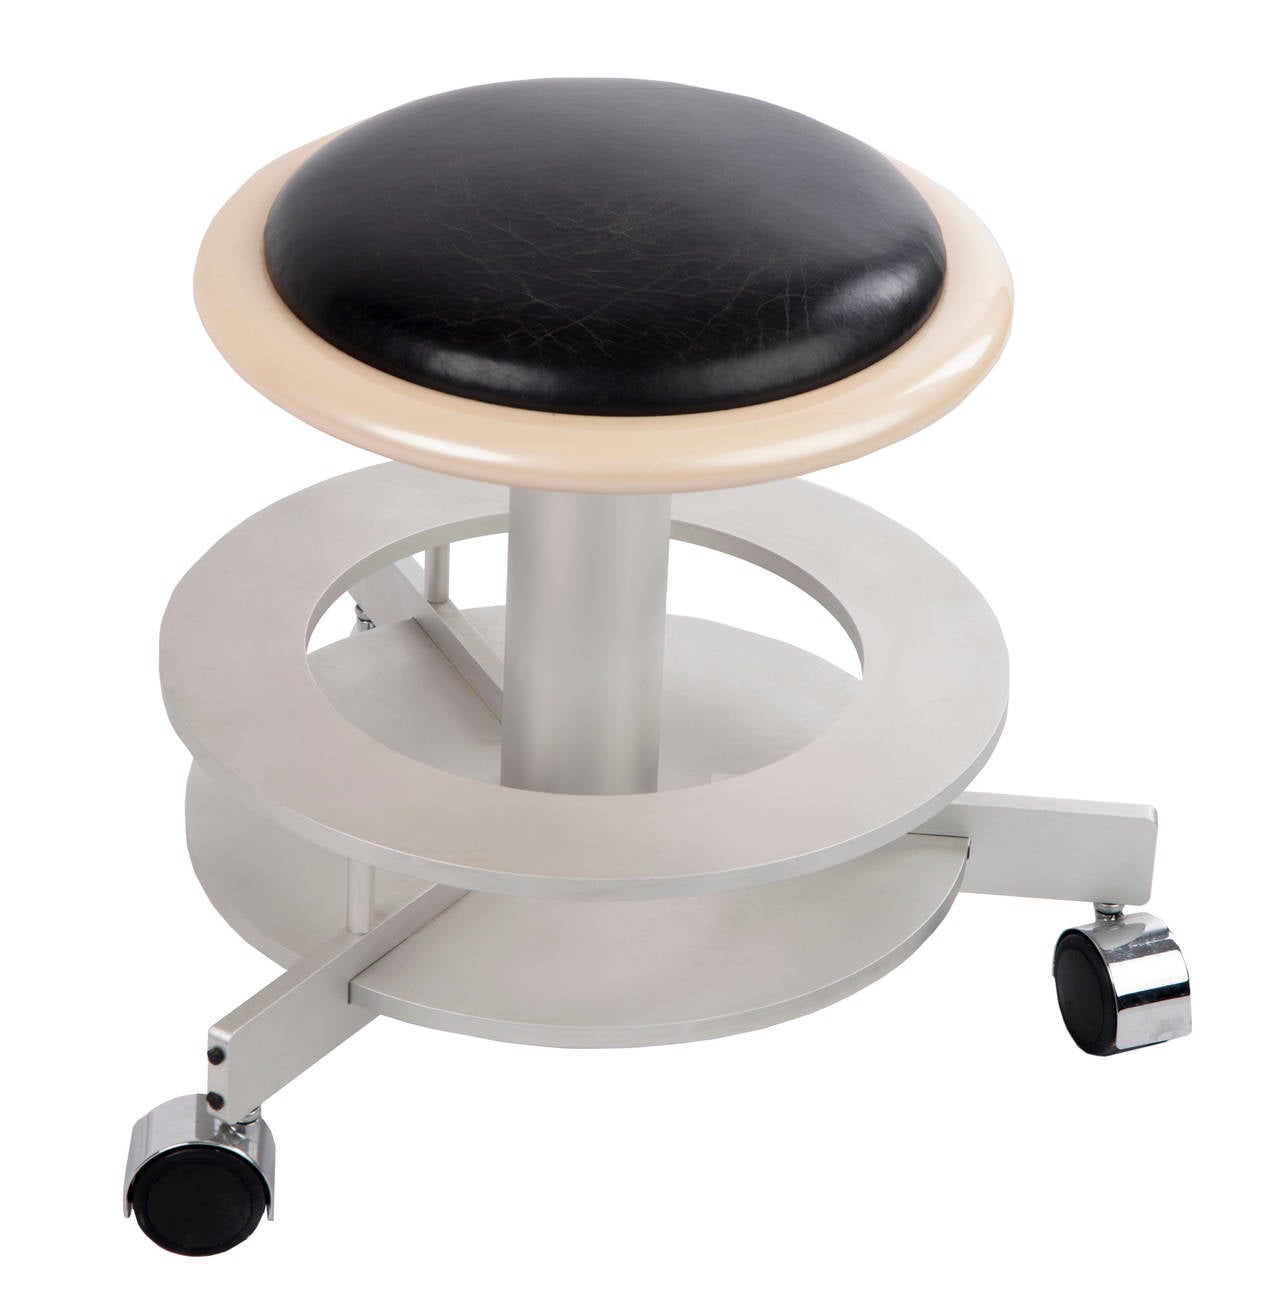 Black leather with wood trim on metal base with rolling casters. Handy for rolling around with low detailed work.